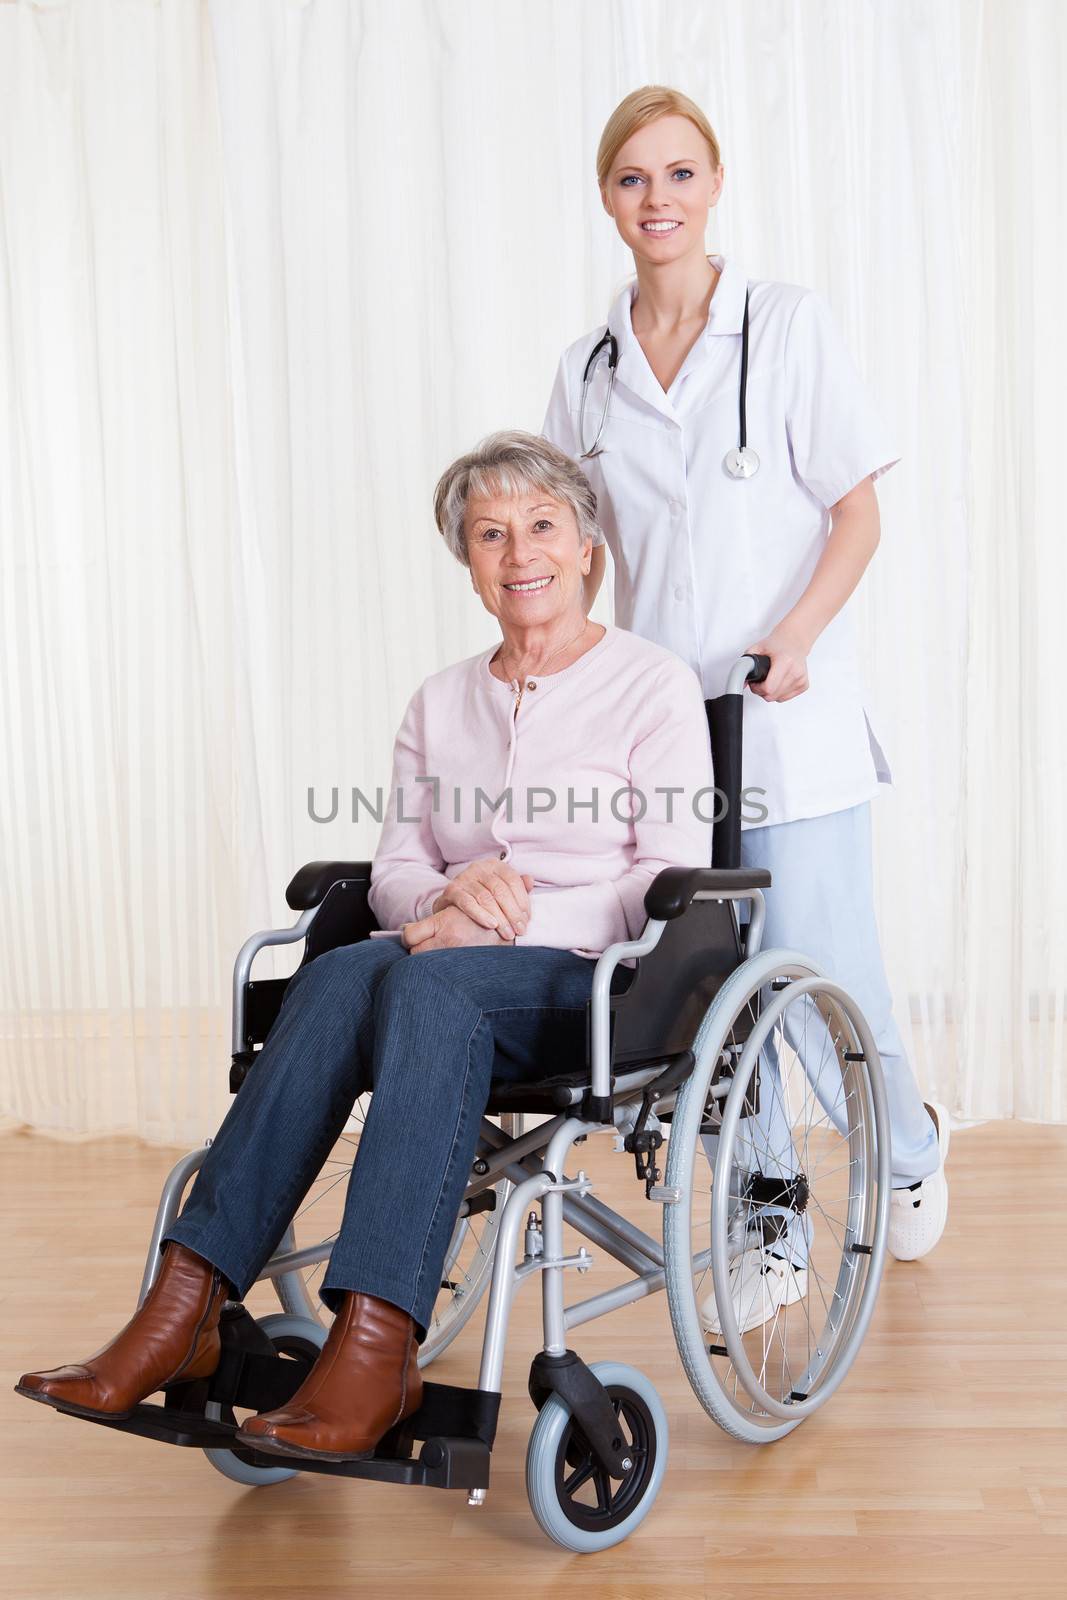 Caring Doctor Helping Handicapped Senior Patient Indoors